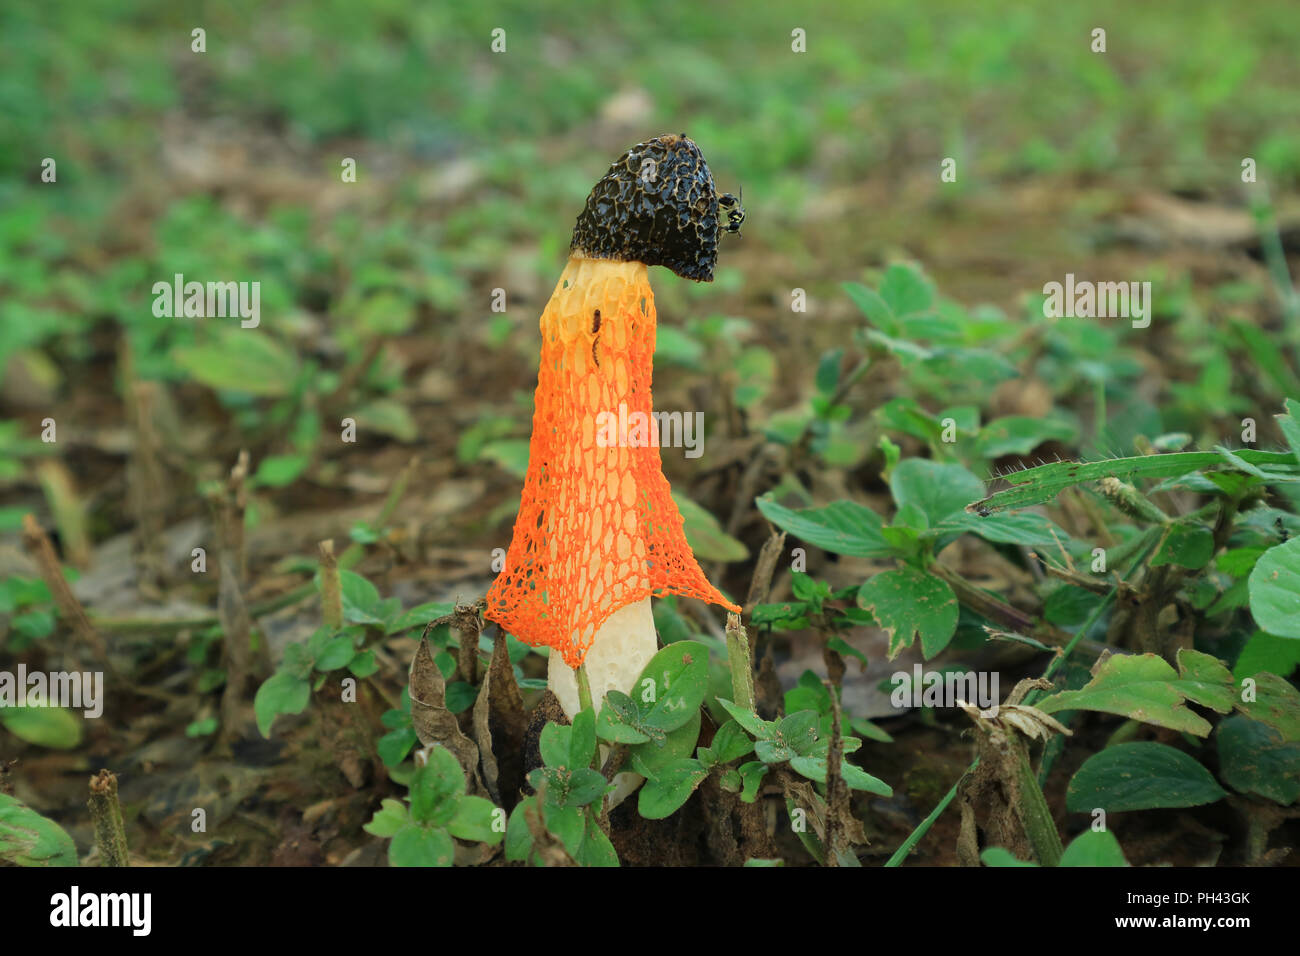 Close Up of Wild Bright Orange Color Long Net Stinkhorn Mushroom or Bamboo Fungus in the Green Field Stock Photo